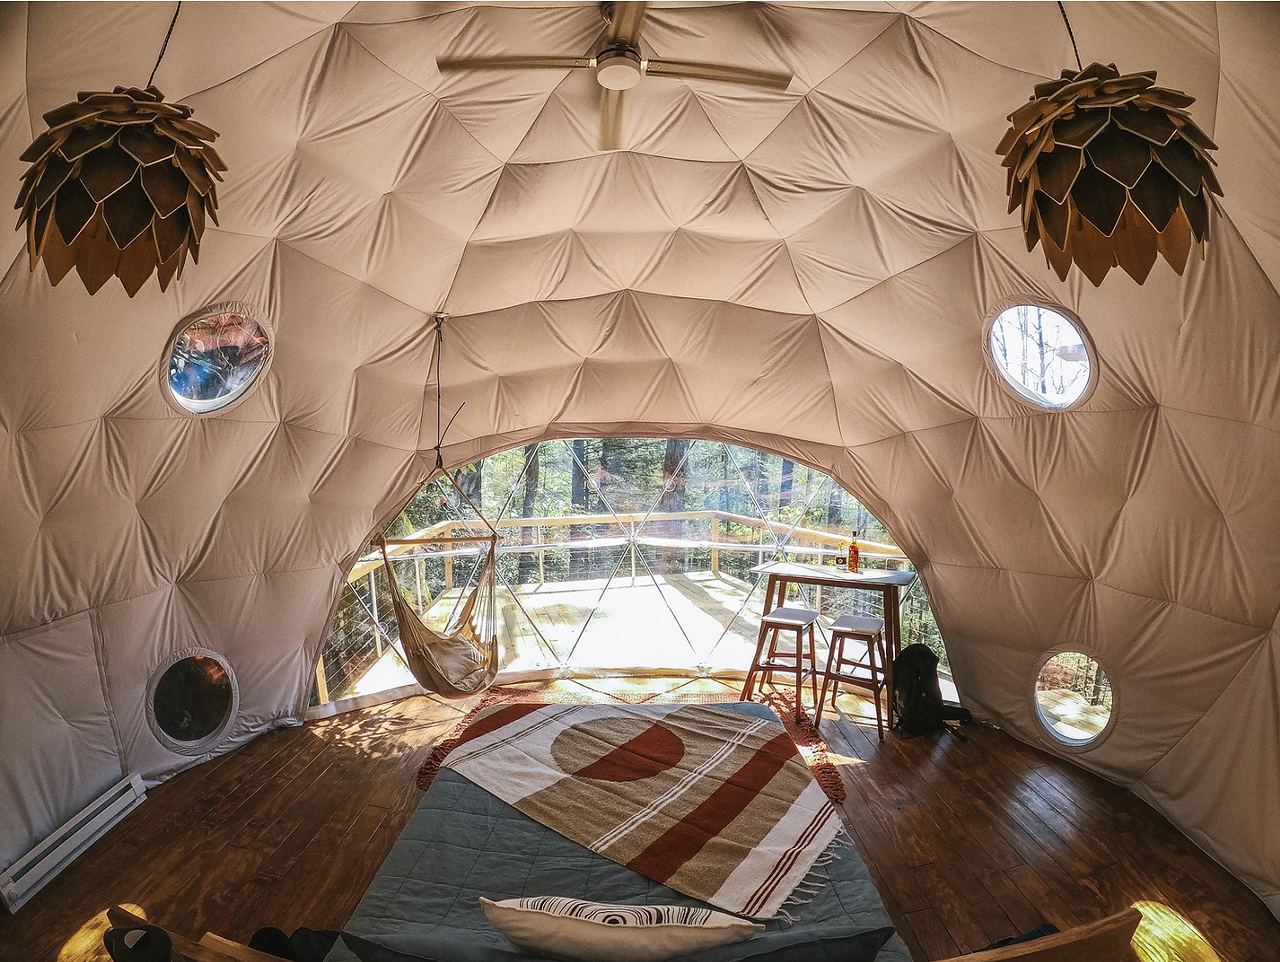 Puma Dome Treehouse
Campton, Ky.
Price Starts at $260 | Hosts 2 Guests
”Welcome to Dome Town! Dome town is a series of geodesic domes suspended in the trees. The domes are connected by suspension bridges that weave through the canopy. In total there are three sleeping domes, a giant canopy lounge net, and one communal water dome, where there are two full baths, and one wash station. Each dome offers a private and unique experience. Sleeping in a dome will change the way you think about square building forever! Dome town is located just a short walk away from The Rock House Cafe. There is no other treehouse dome experience quite like this. Explore the canopy, enjoy the gorge, sleep in a dome!” — rrgcabin.com